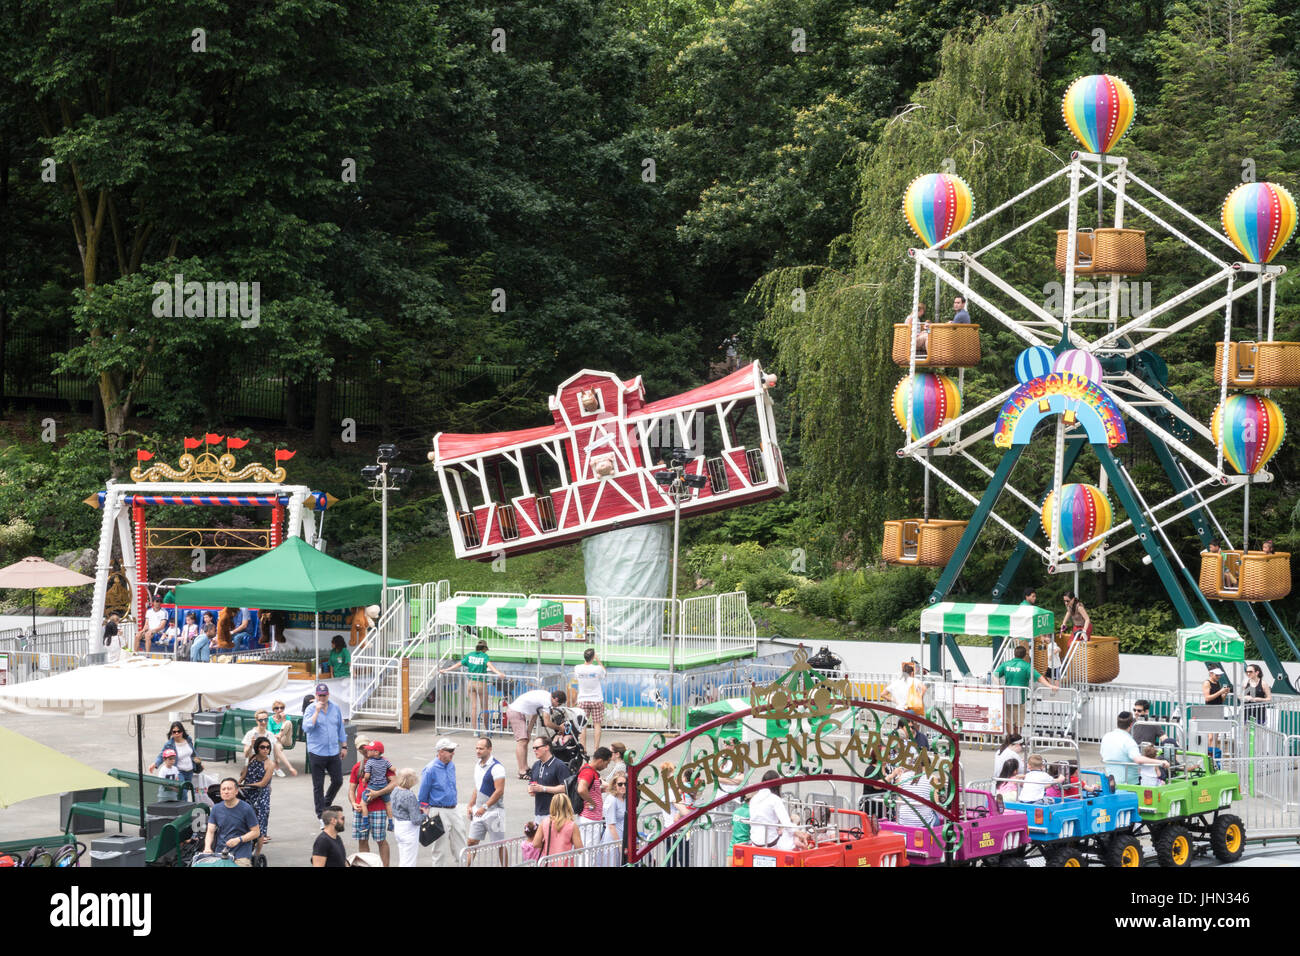 Victorian Gardens Carnival Rides In Central Park Nyc Stock Photo